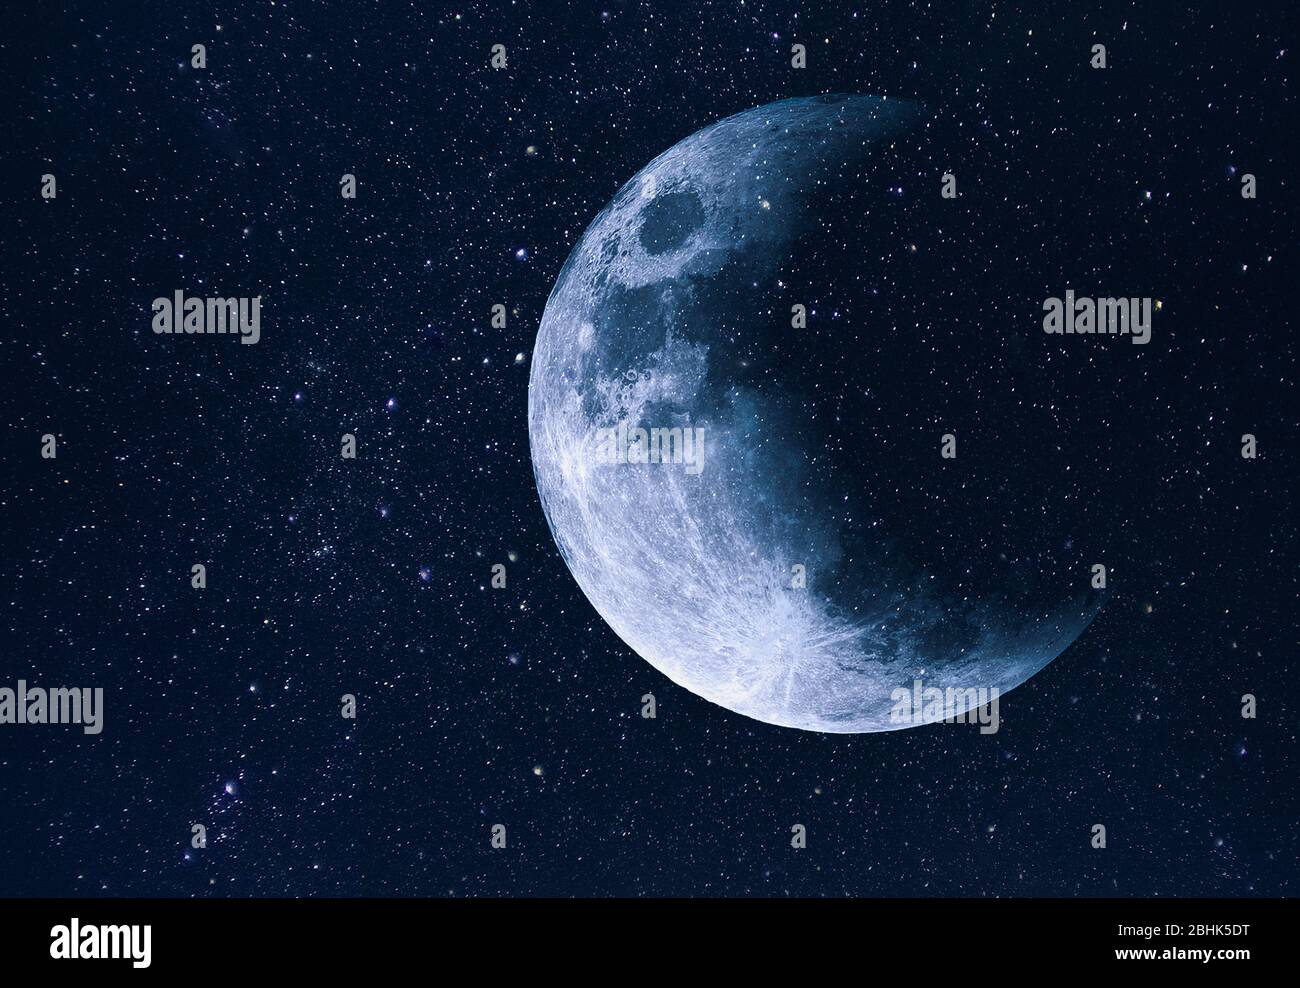 Amazing space, sky with stars and moon during eclipse, background Stock Photo